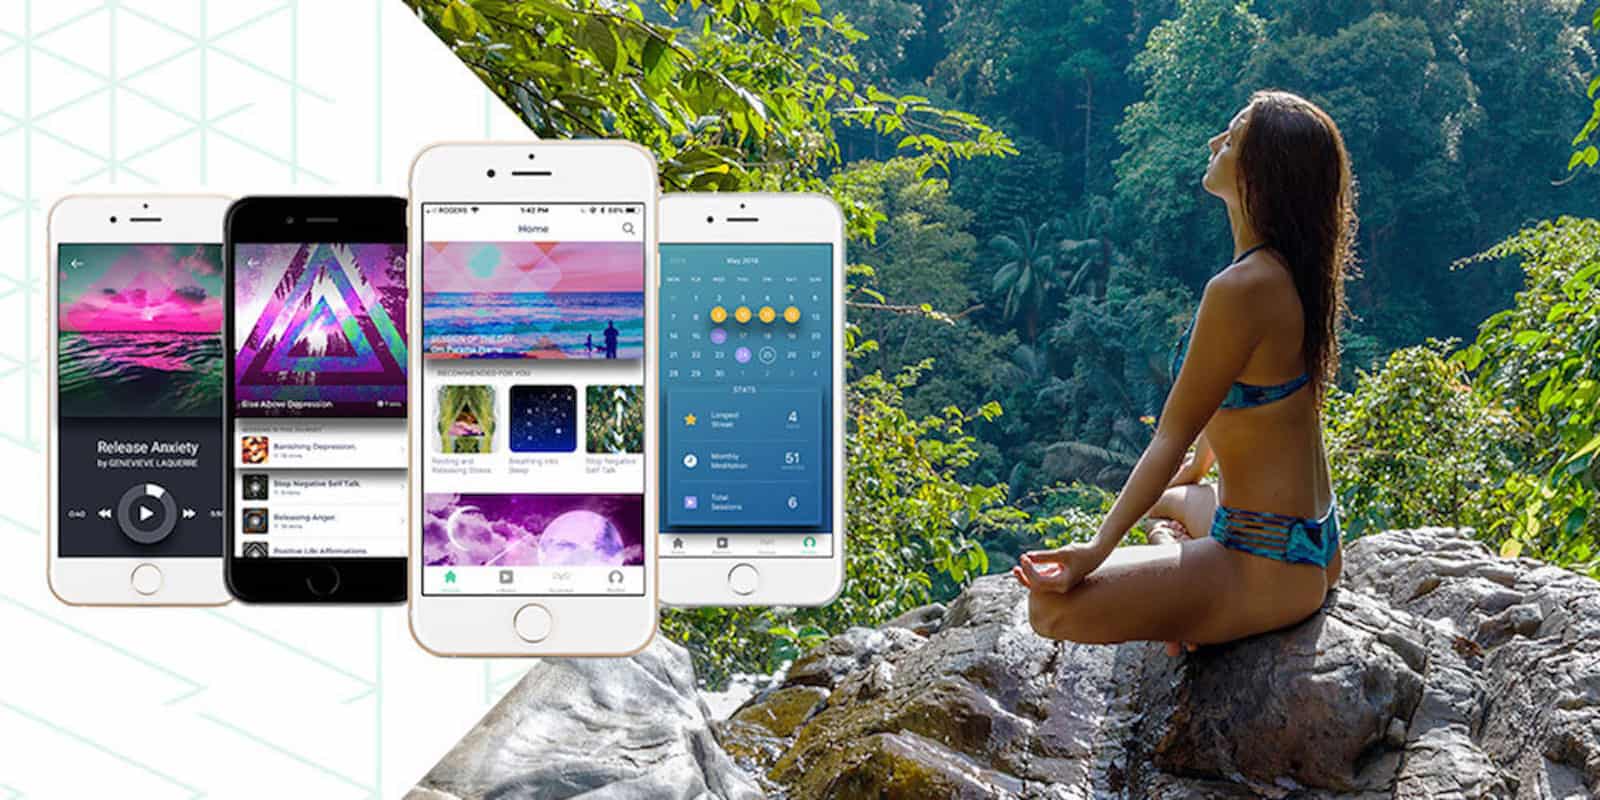 This meditation app offers guided meditation sessions and breathing exercises with tools for tracking your practice over time.